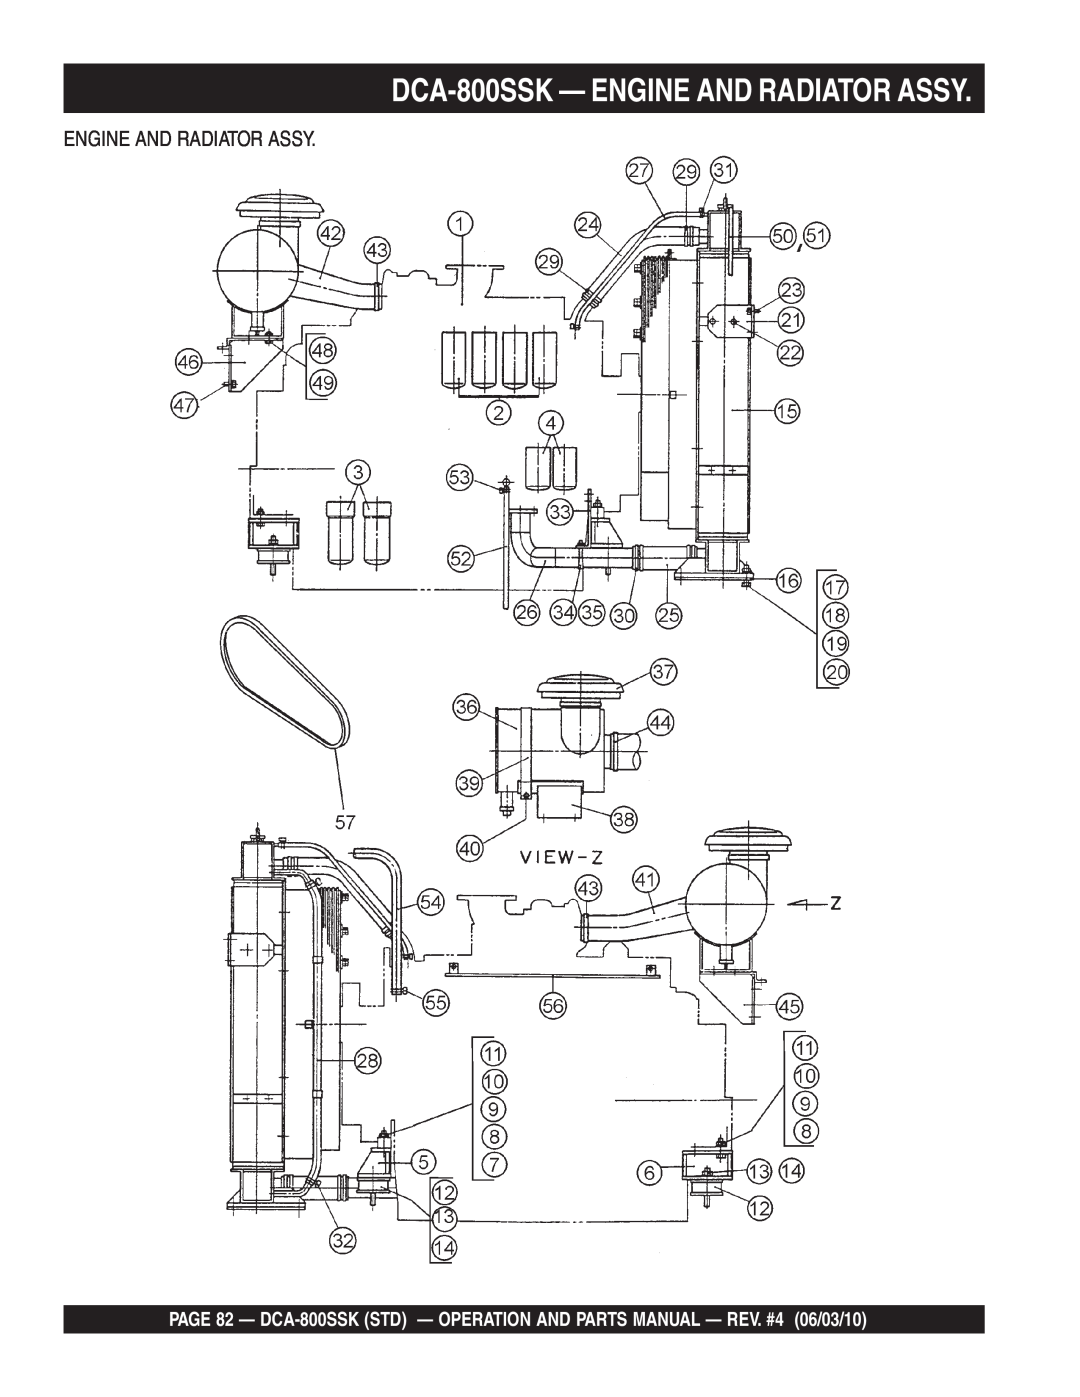 Multiquip operation manual DCA-800SSK - ENGINE AND RADIATOR ASSY, Engine And Radiator Assy 